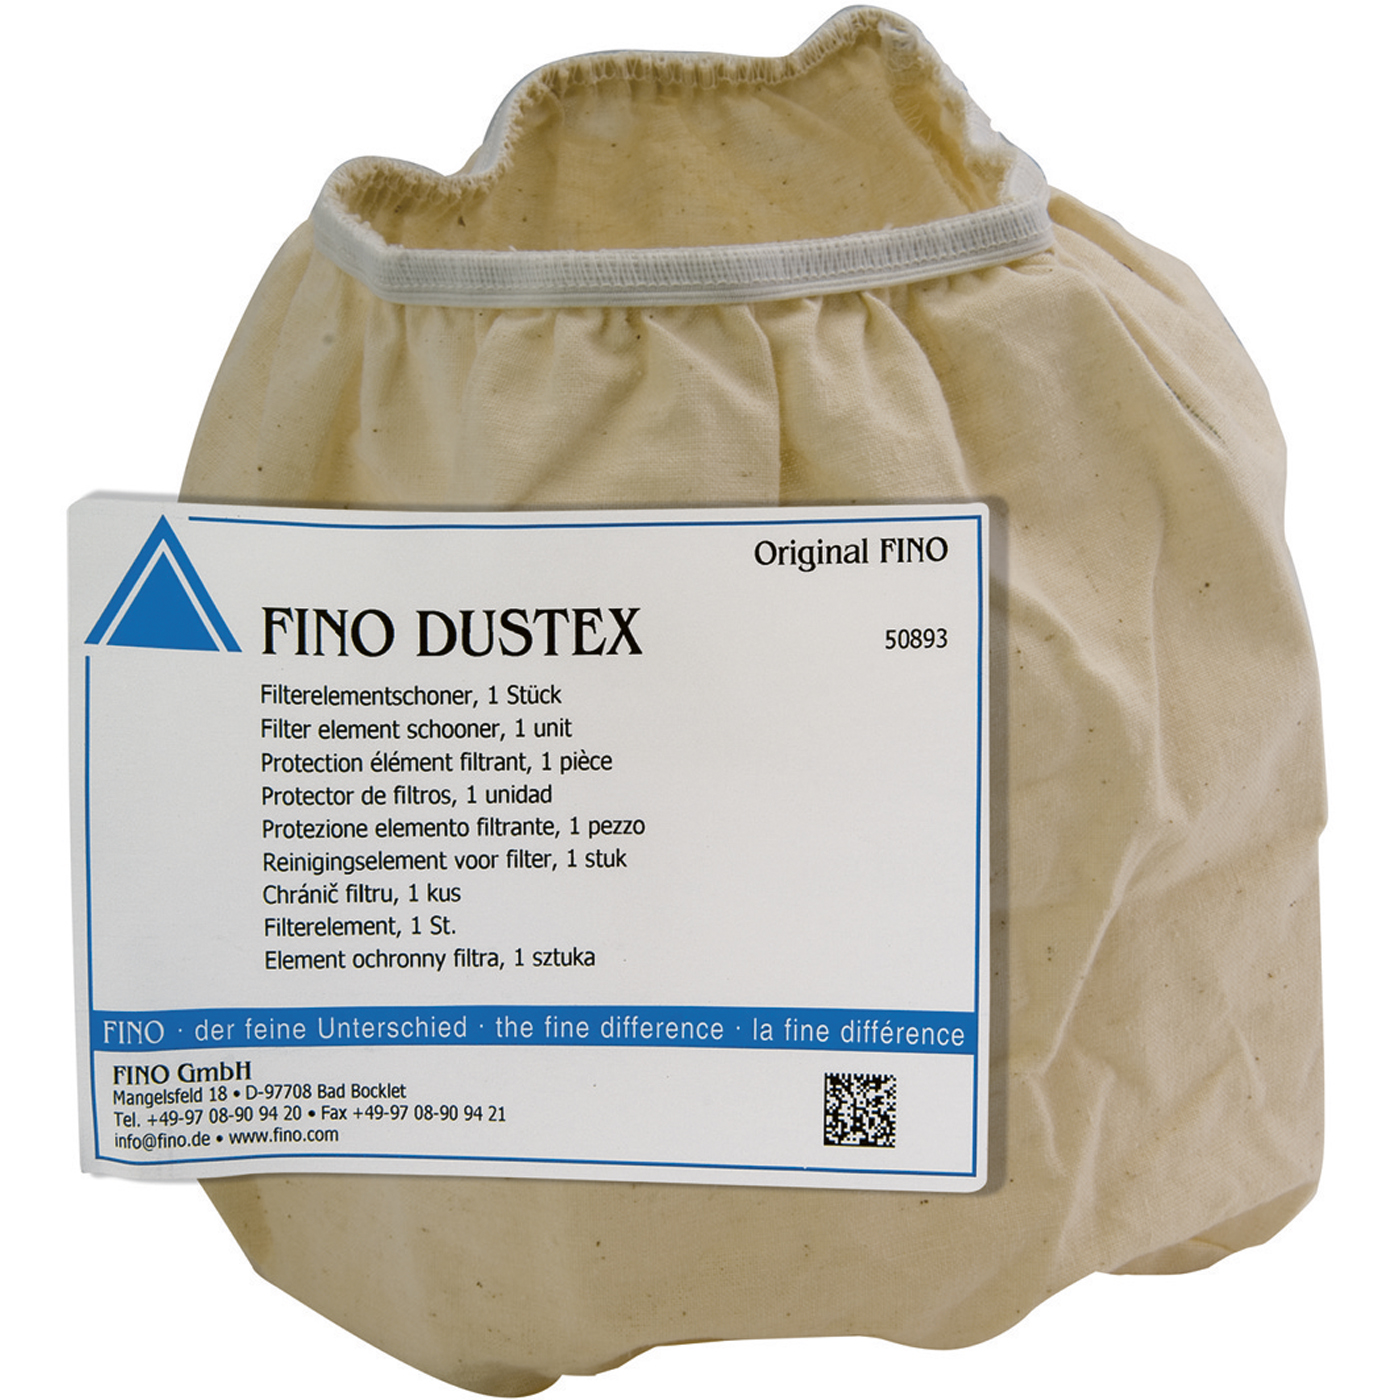 Filter Element Protection, for FINO DUSTEX - 1 piece